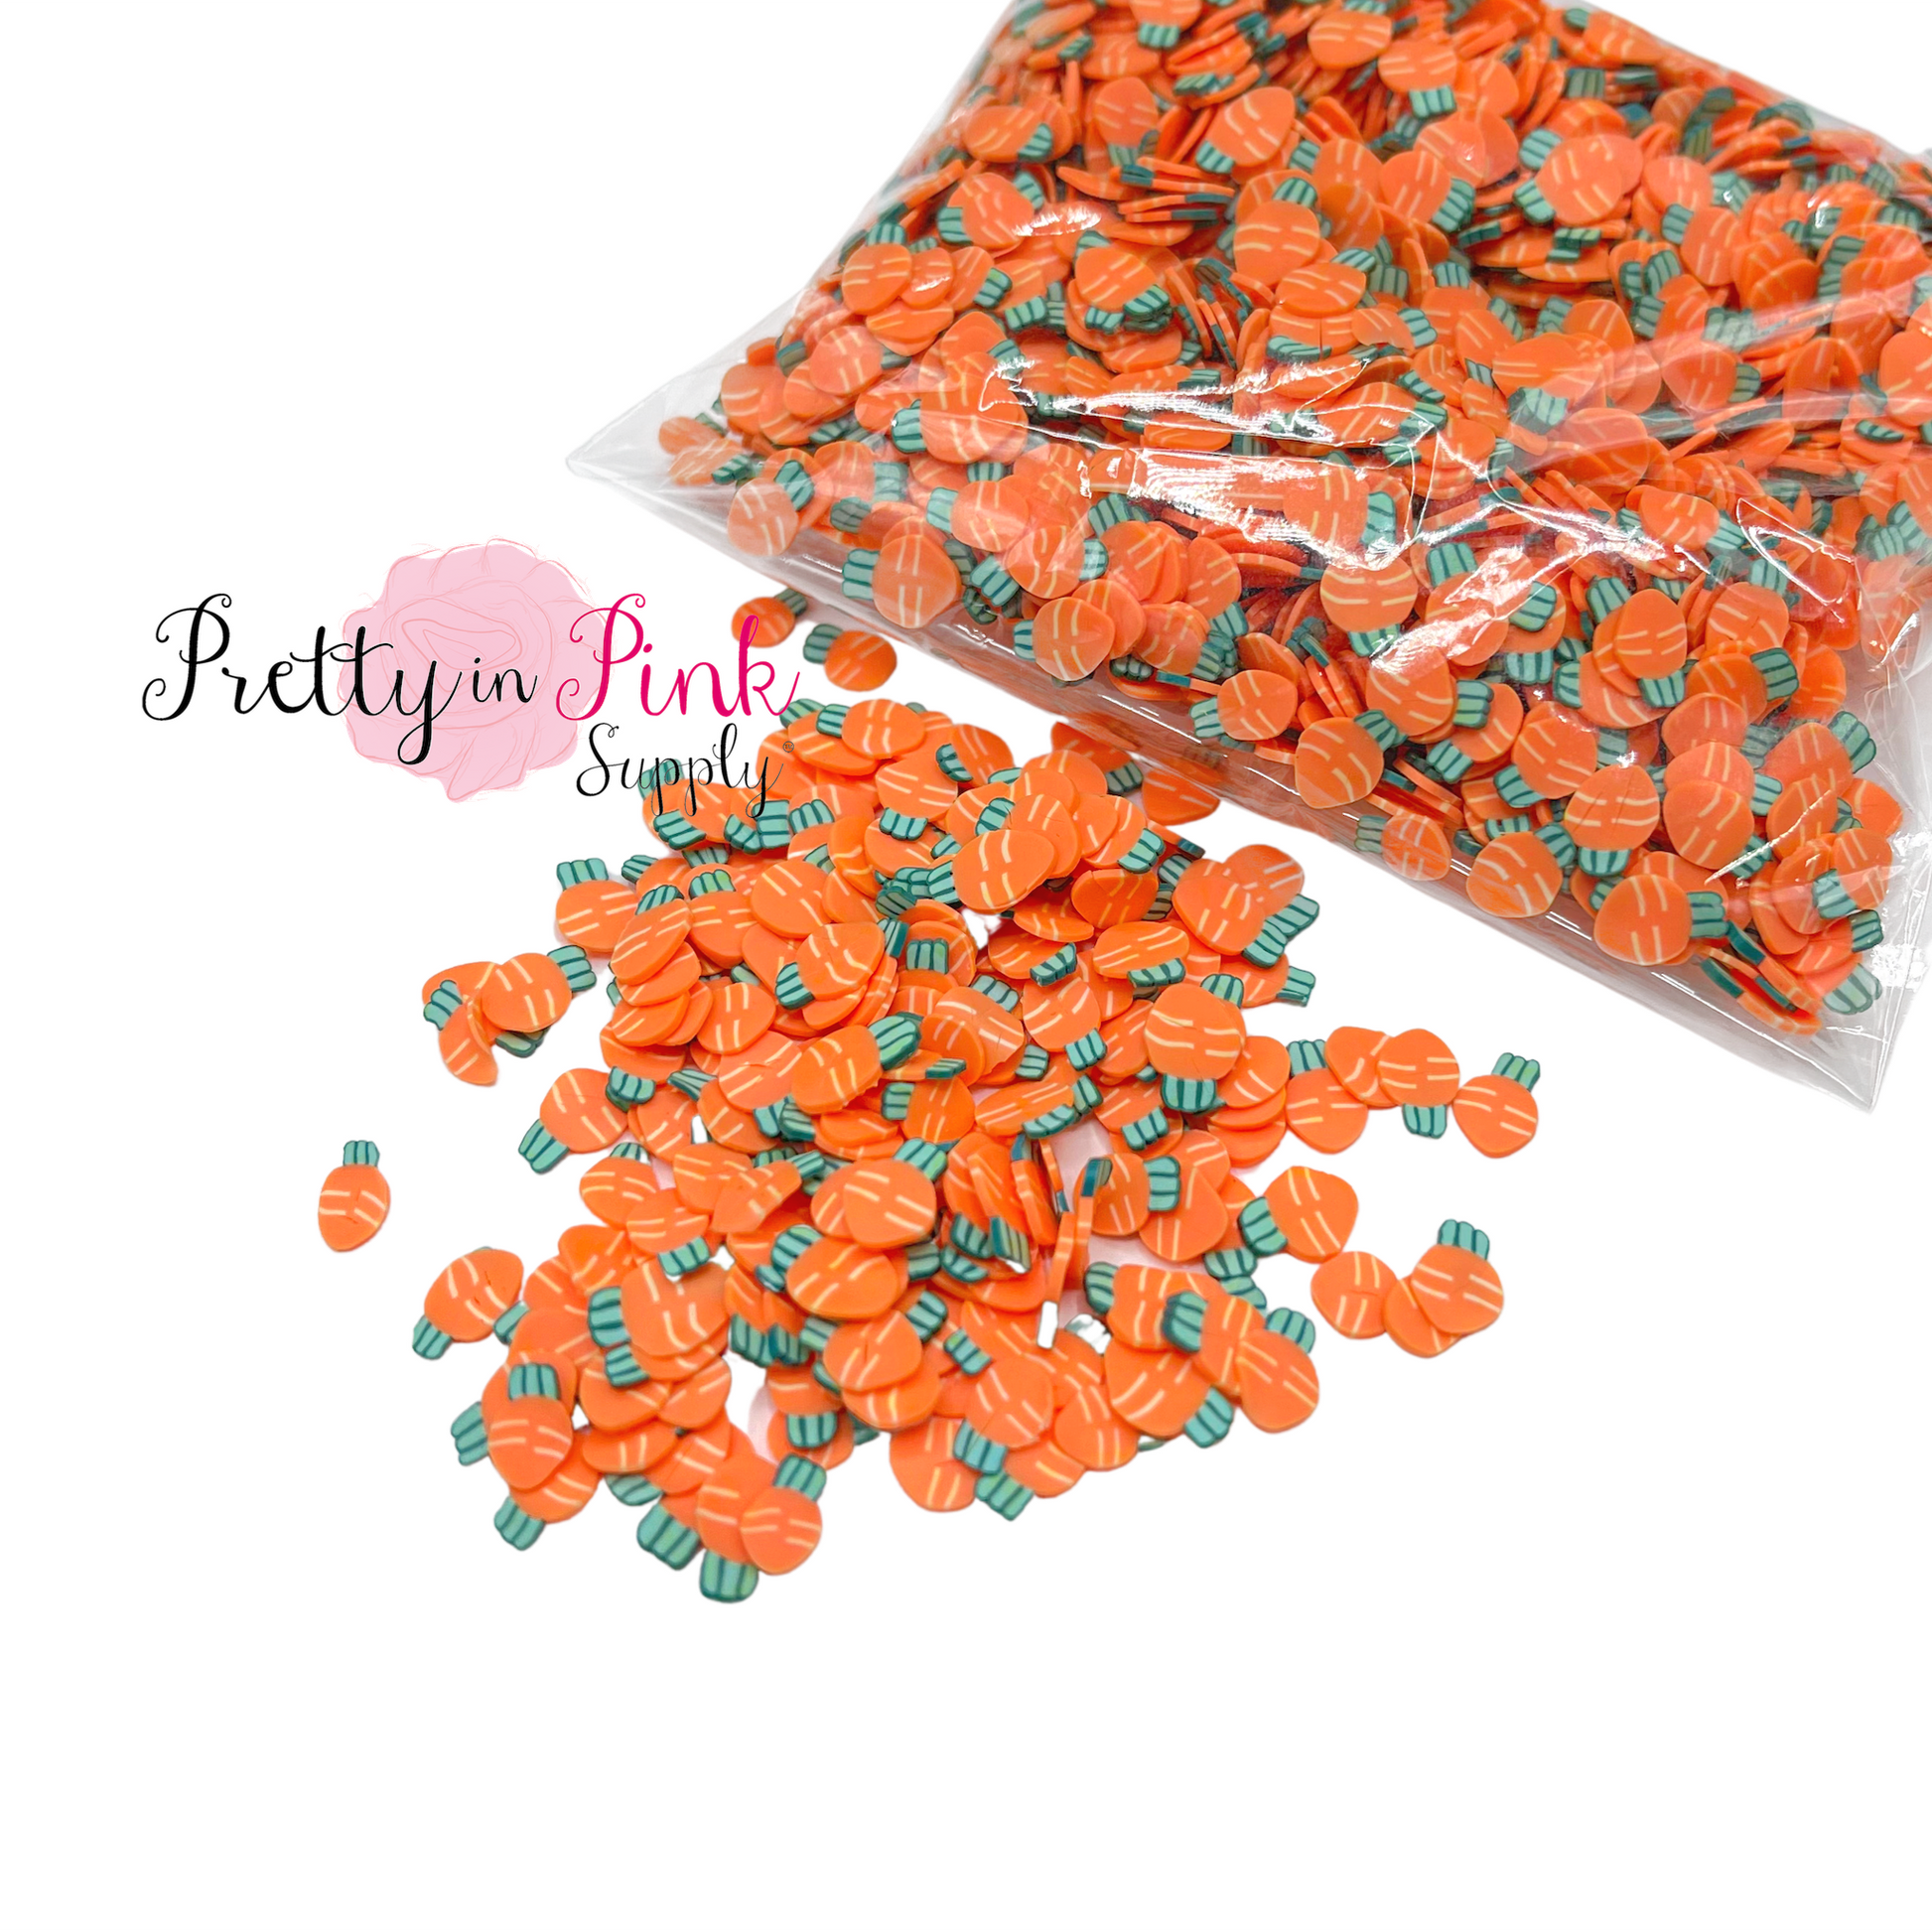 Carrot Confetti Loose CLAY Slices - Pretty in Pink Supply